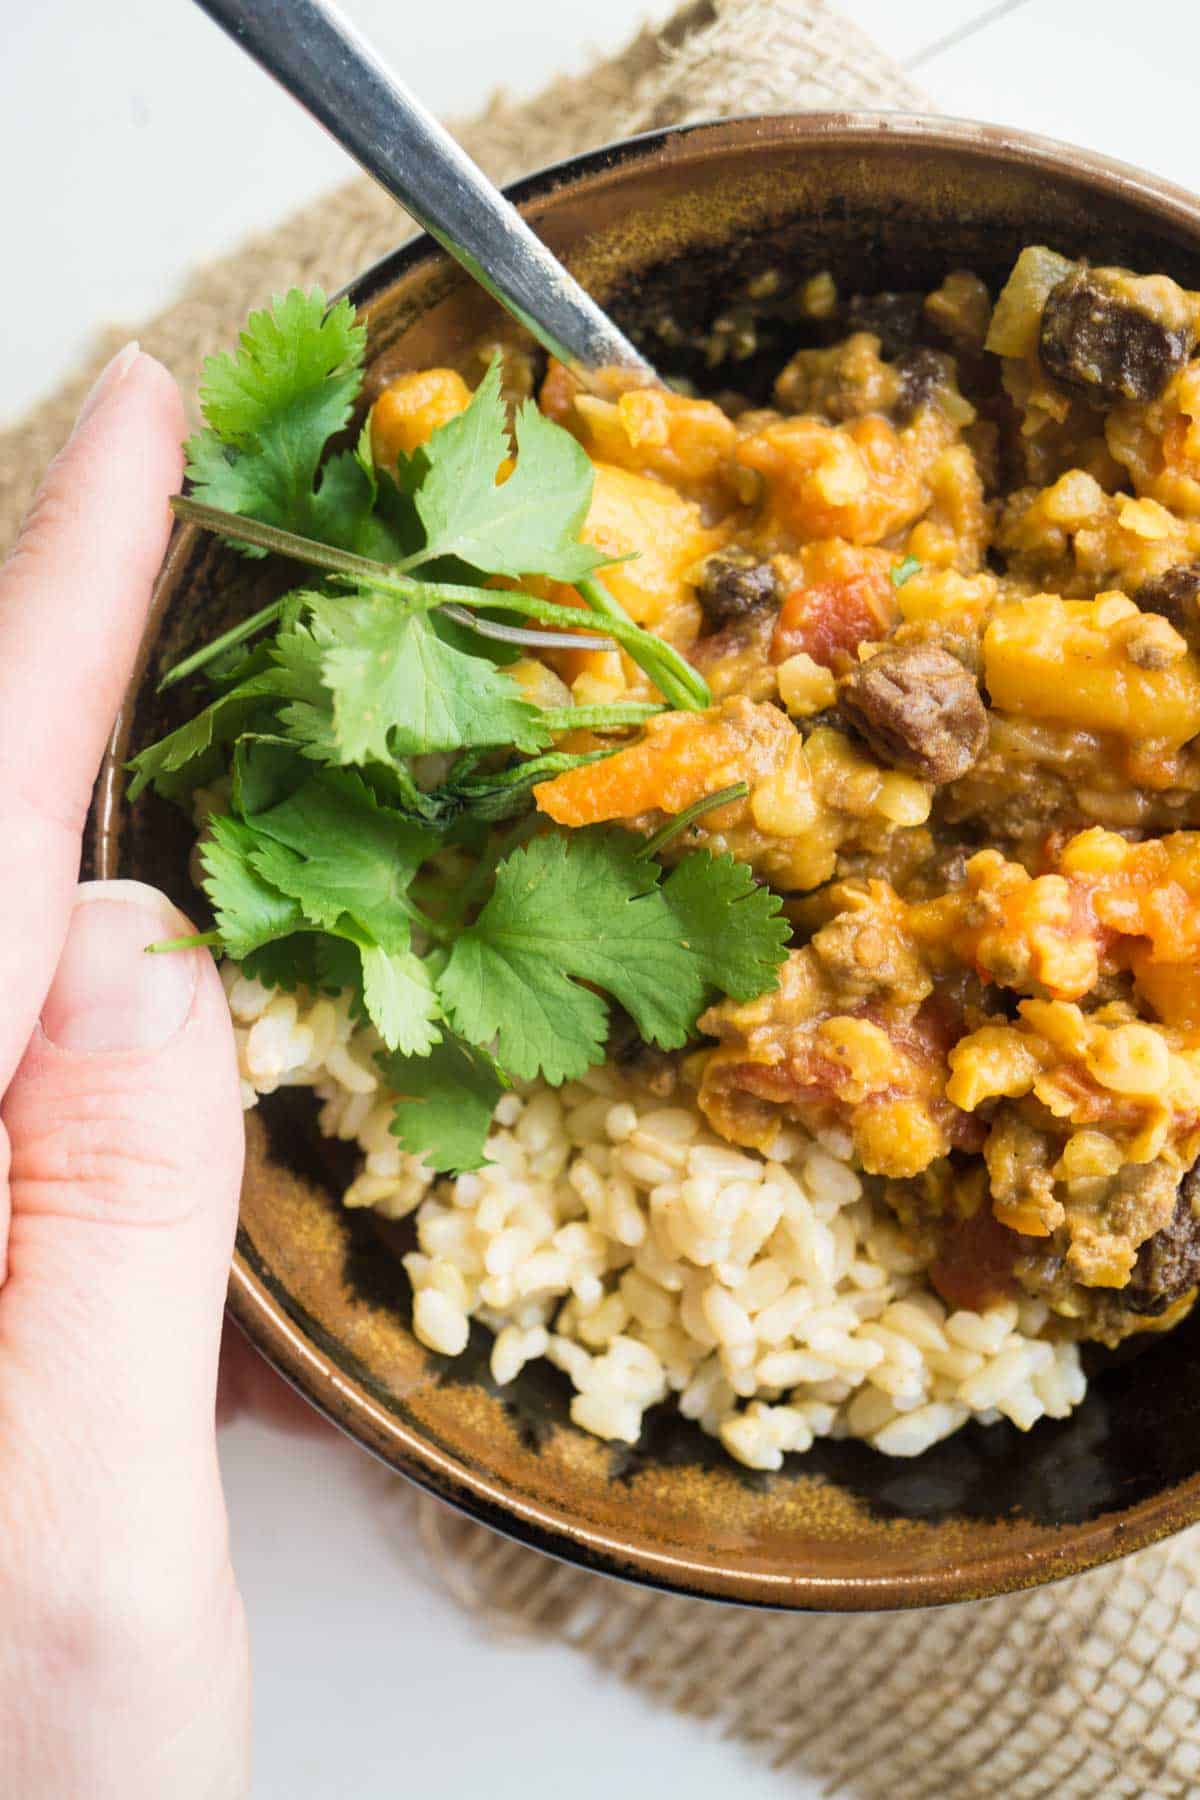 Moroccan Beef and Lentil Bowl with parsley garnish and rice. A hand holding the side of the bowl